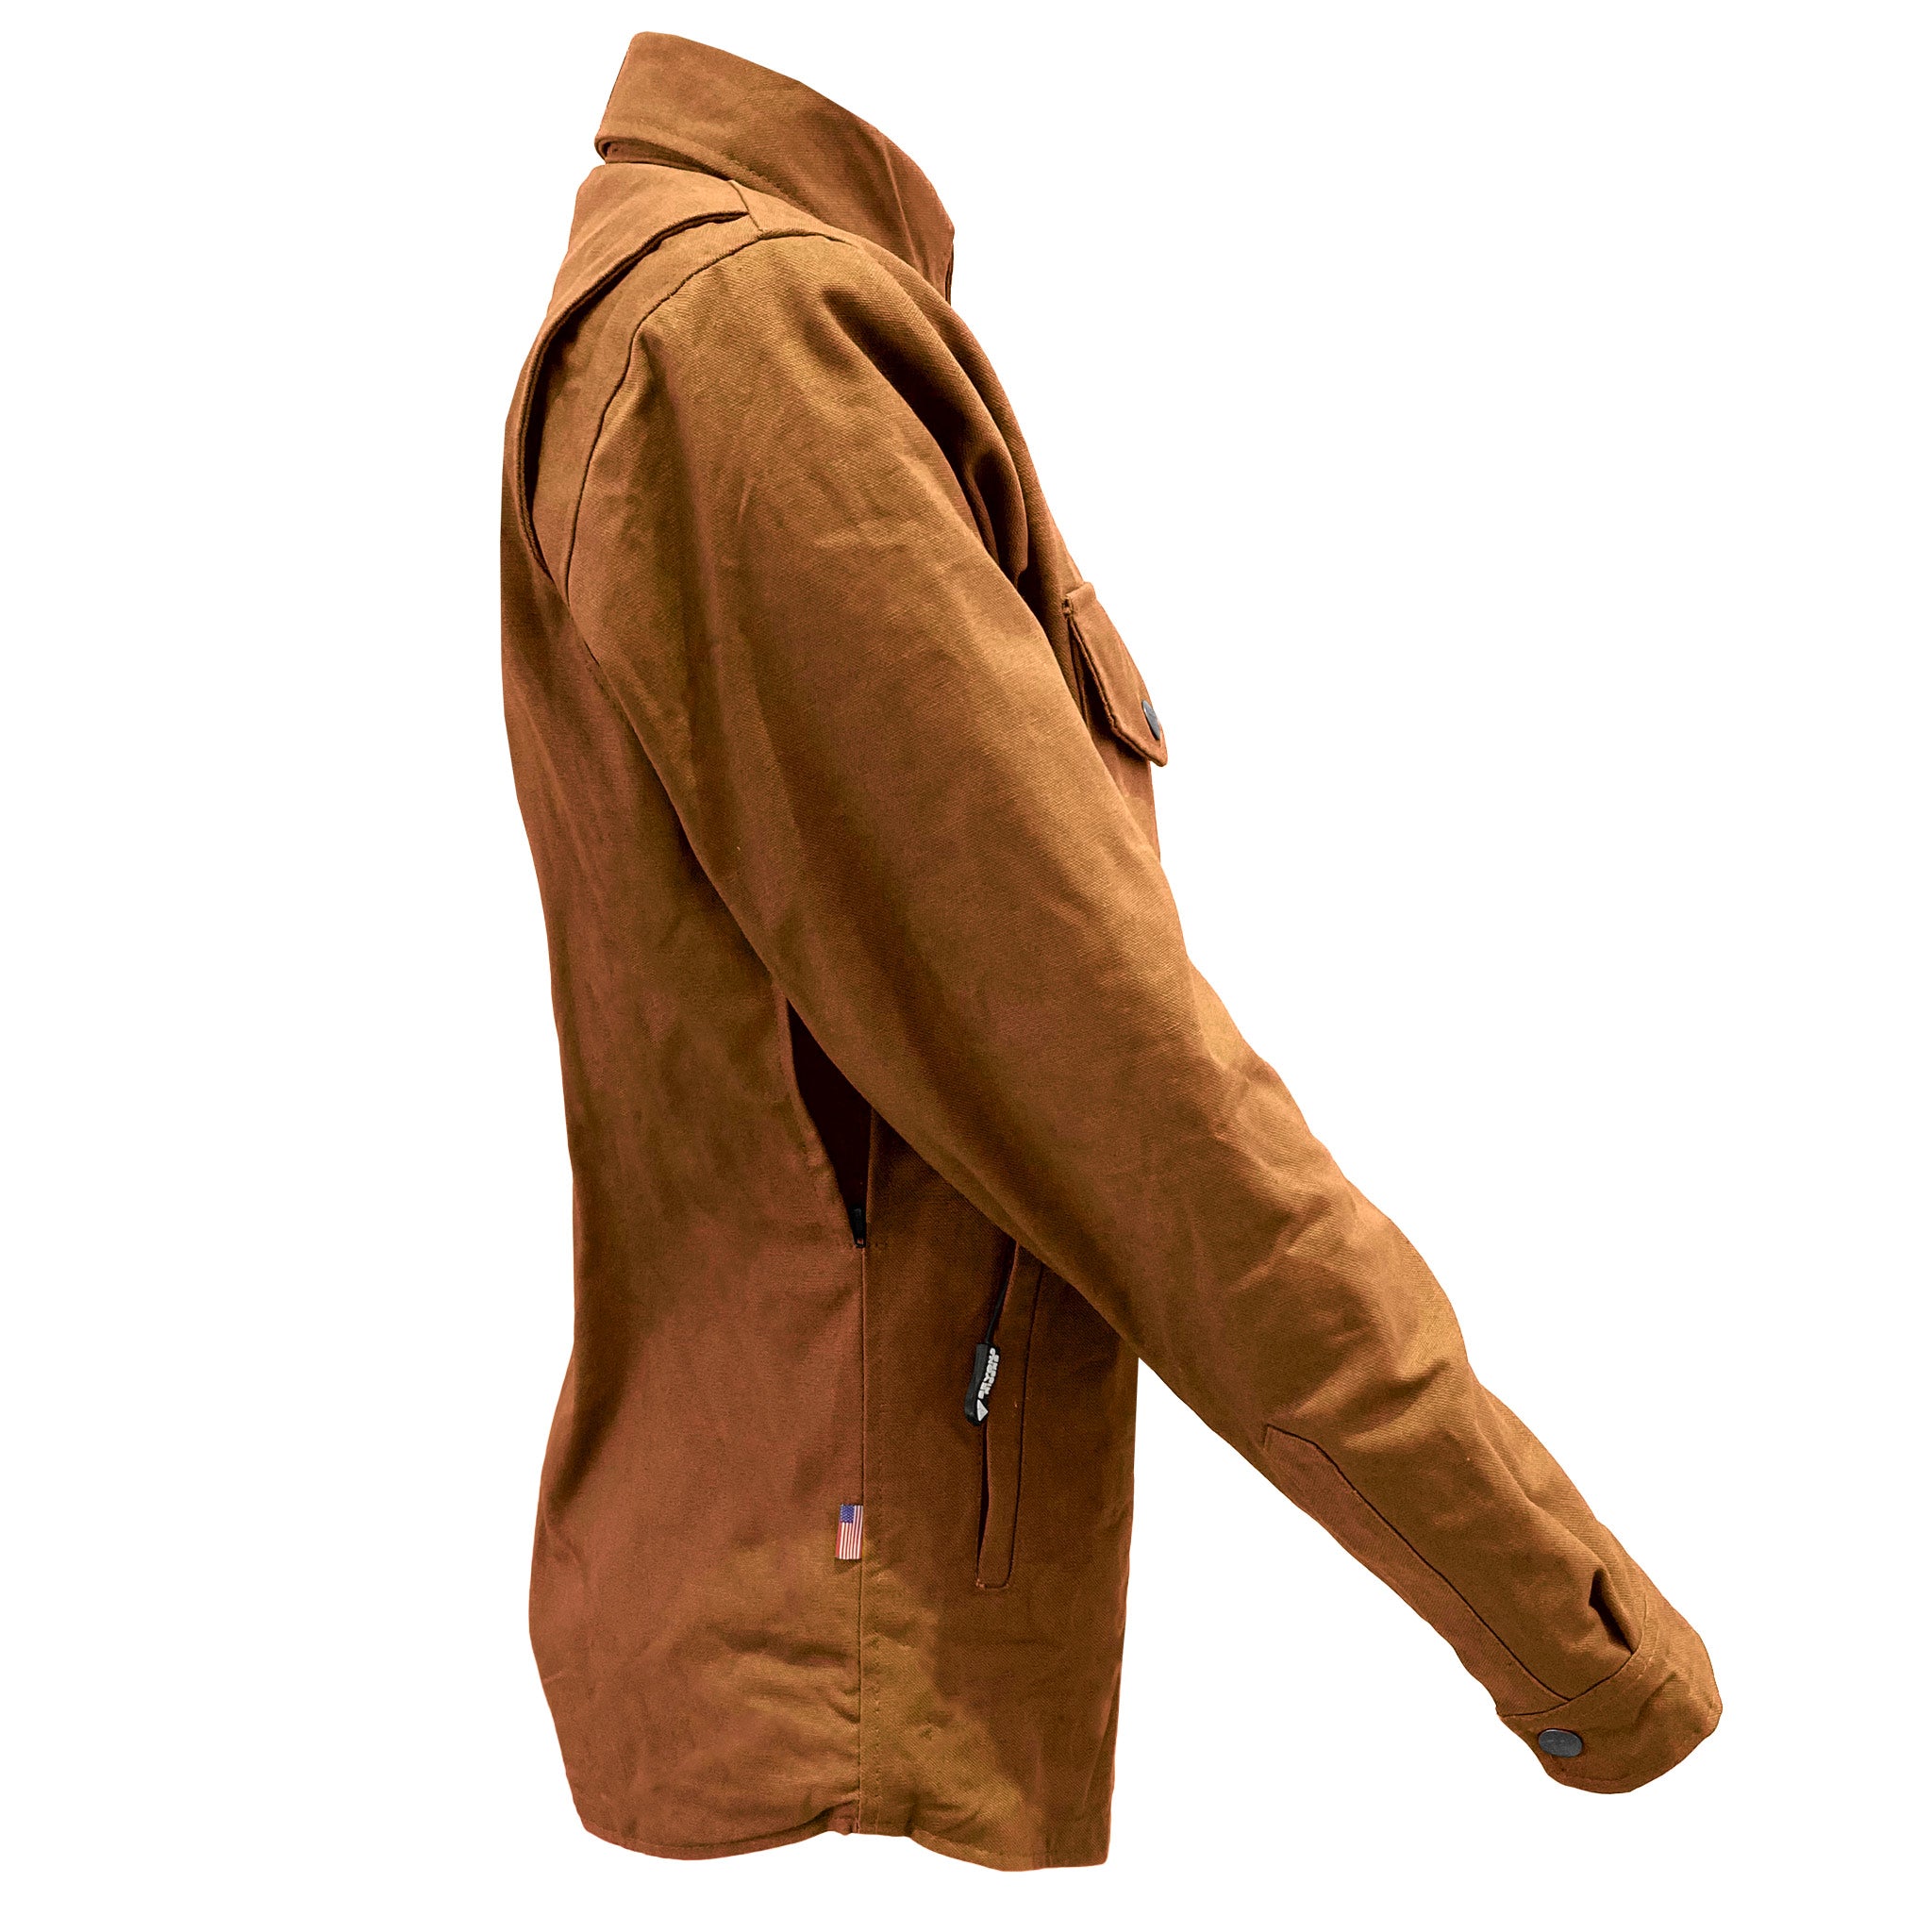 Protective Canvas Jacket for Women - Light Brown with Pads